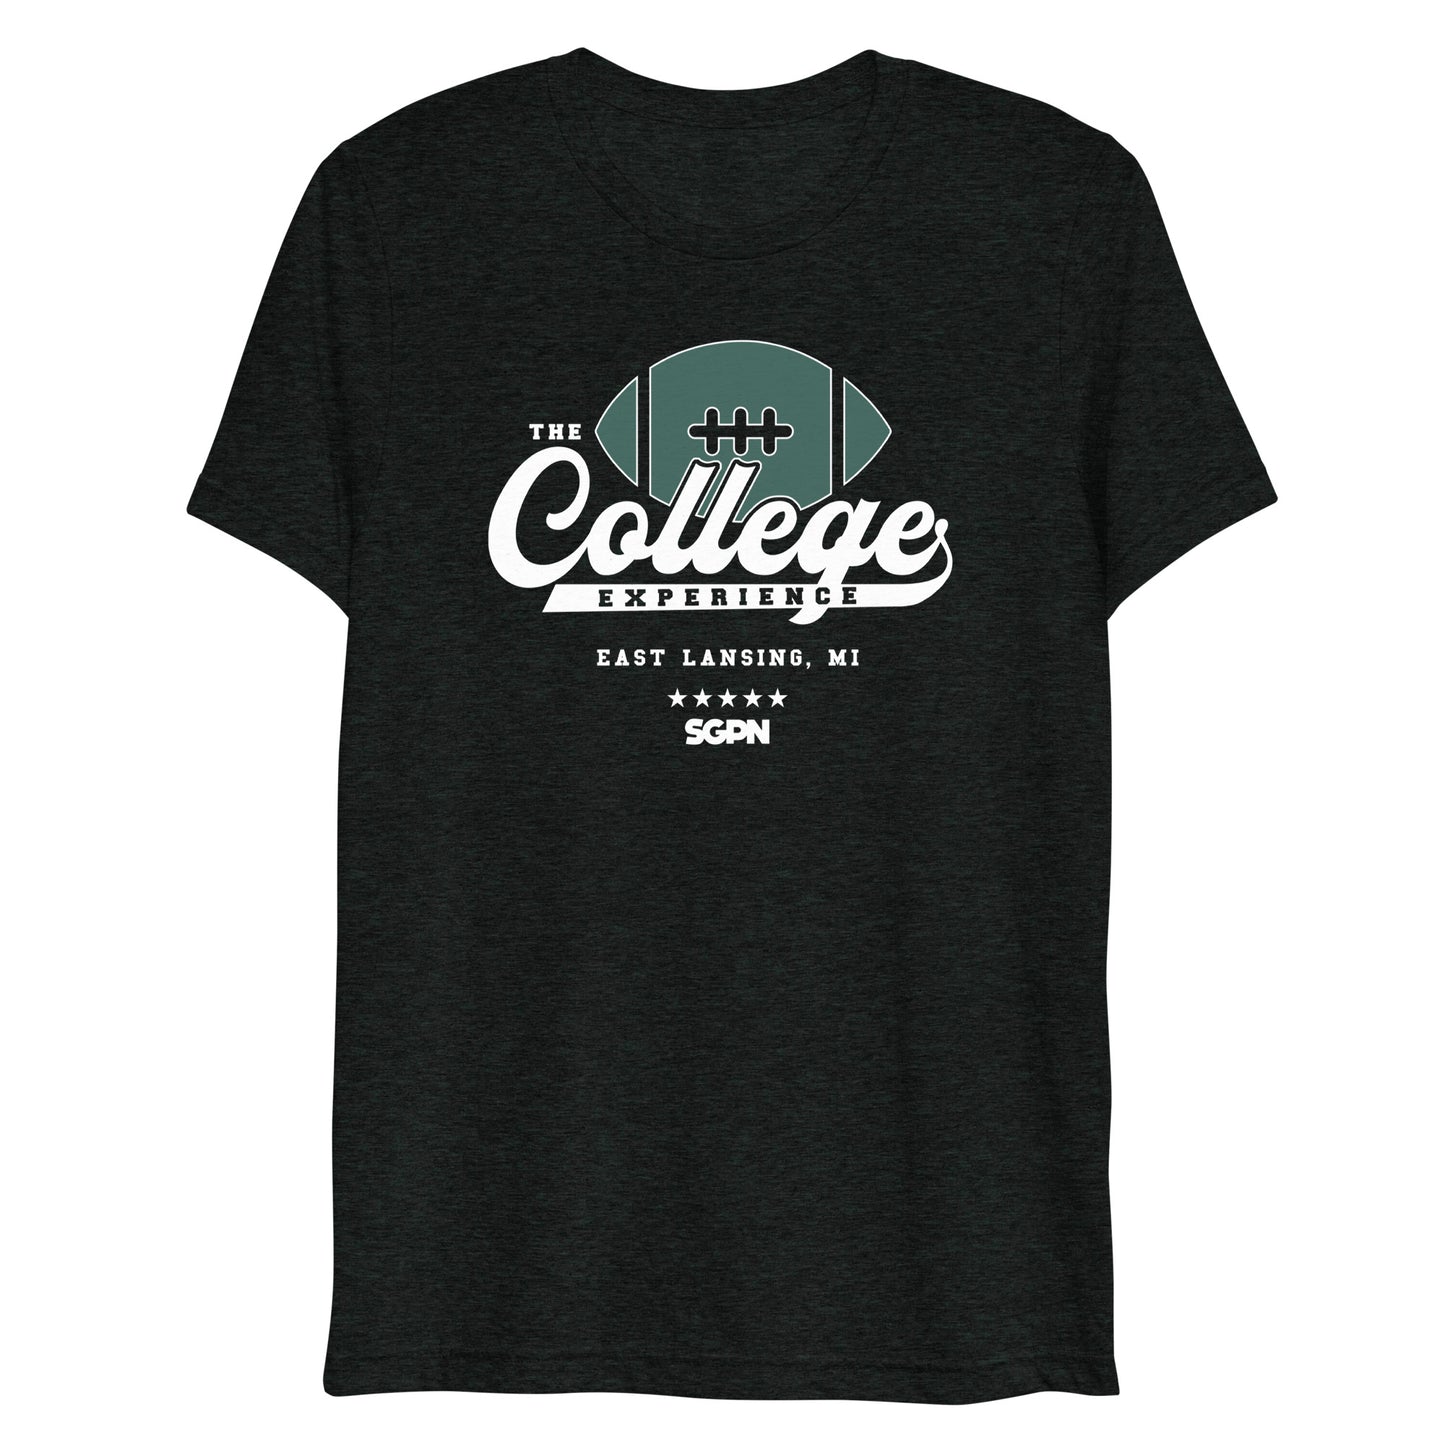 The College Football Experience - East Lansing edition - Charcoal Black Short sleeve t-shirt